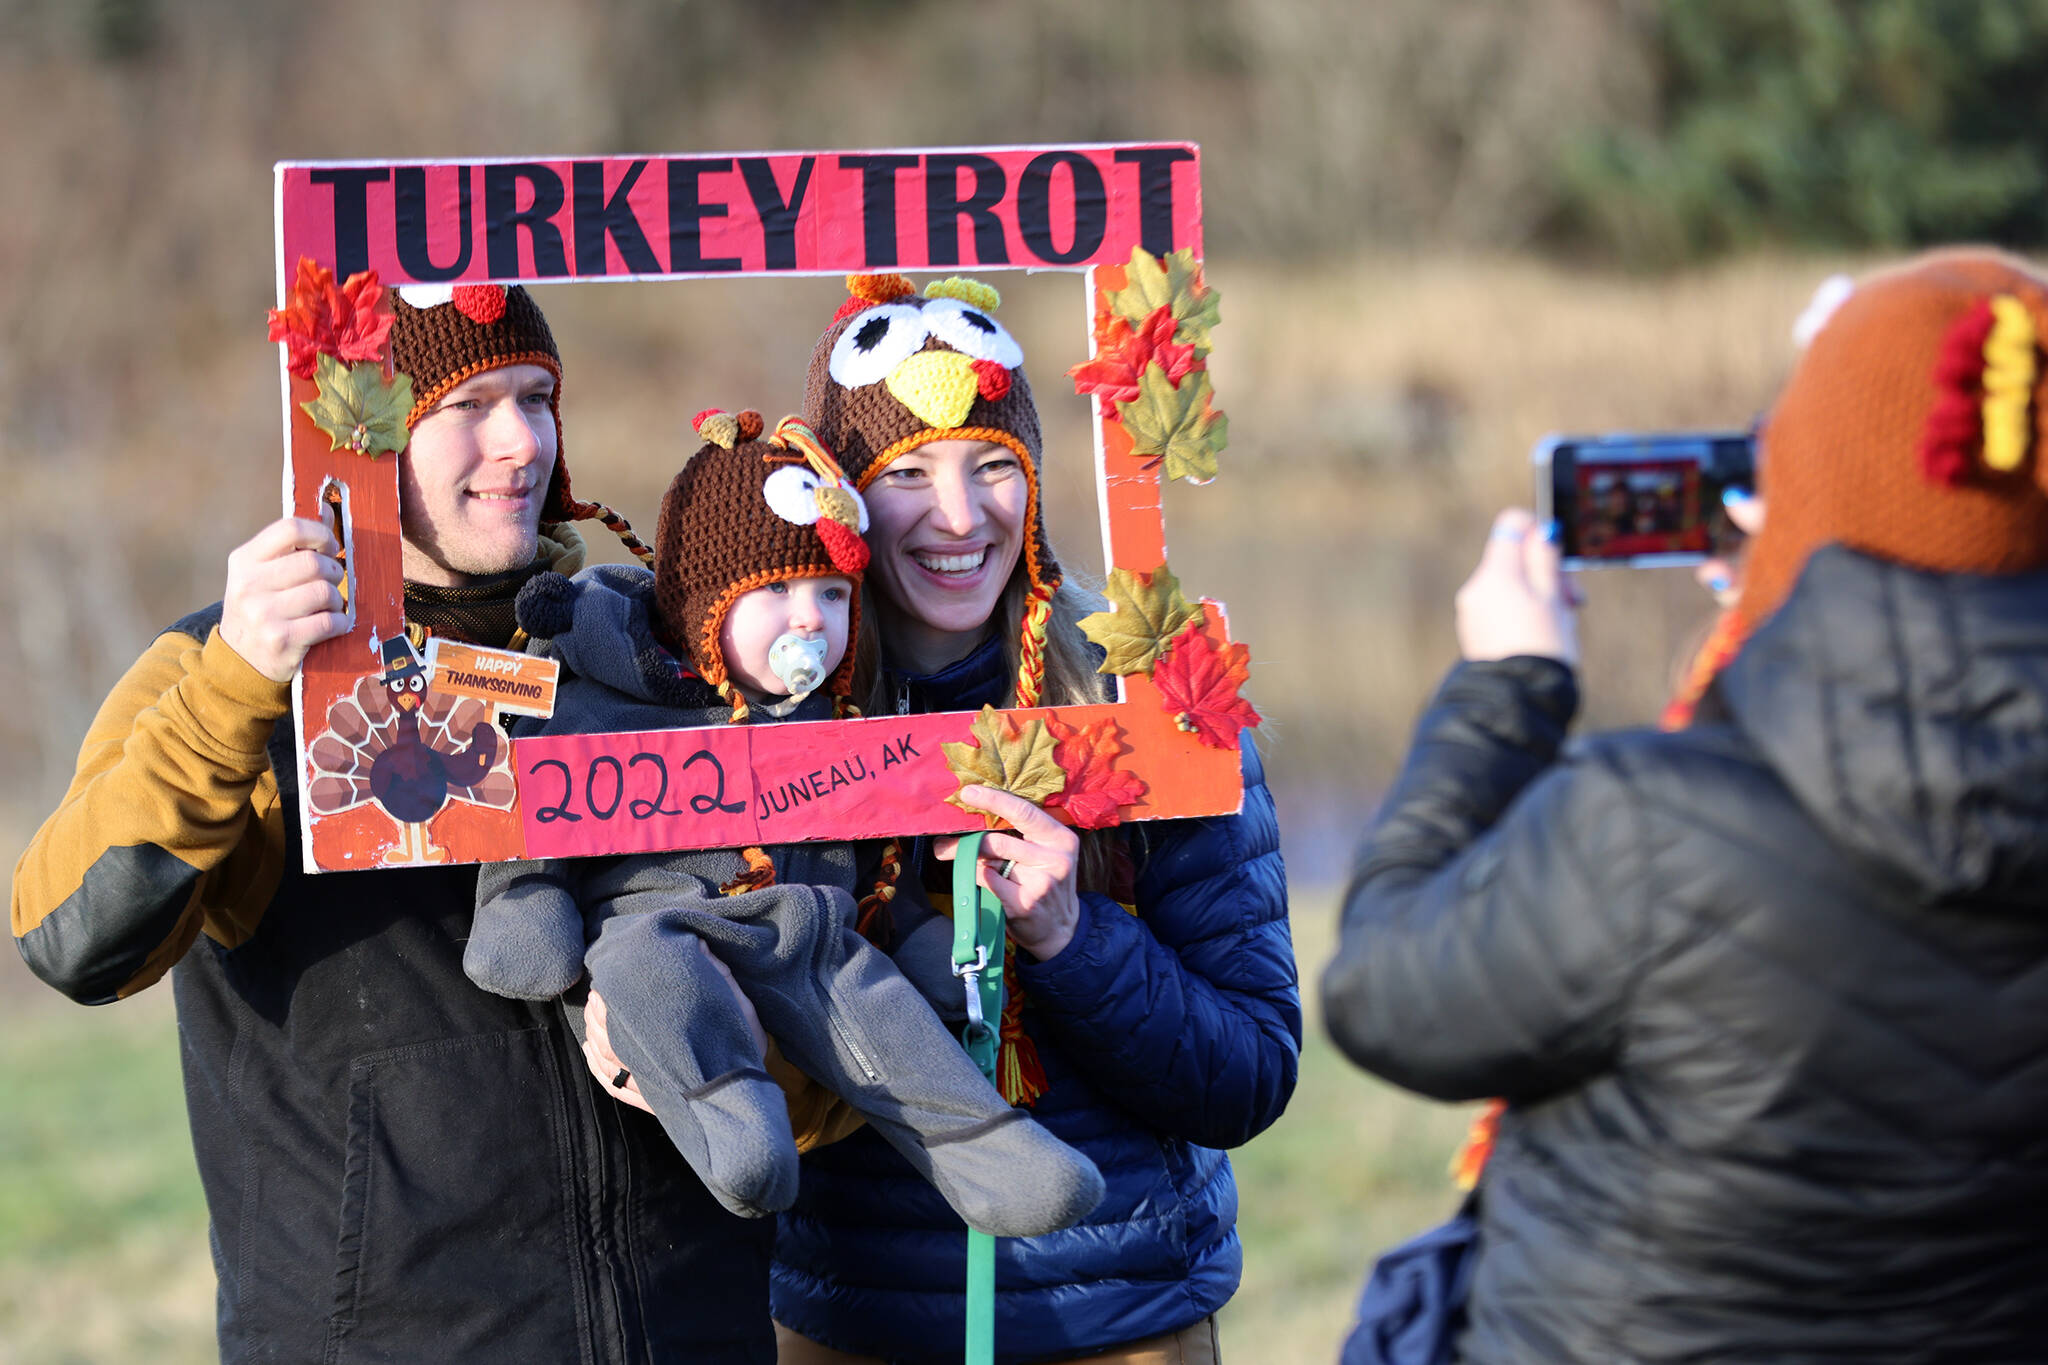 Josh, Bridger and Carolyn Smith pose for a photo taken by Misty Dohrn during the ninth annual Turkey Trot held Thursday. (Ben Hohenstatt / Juneau Empire)